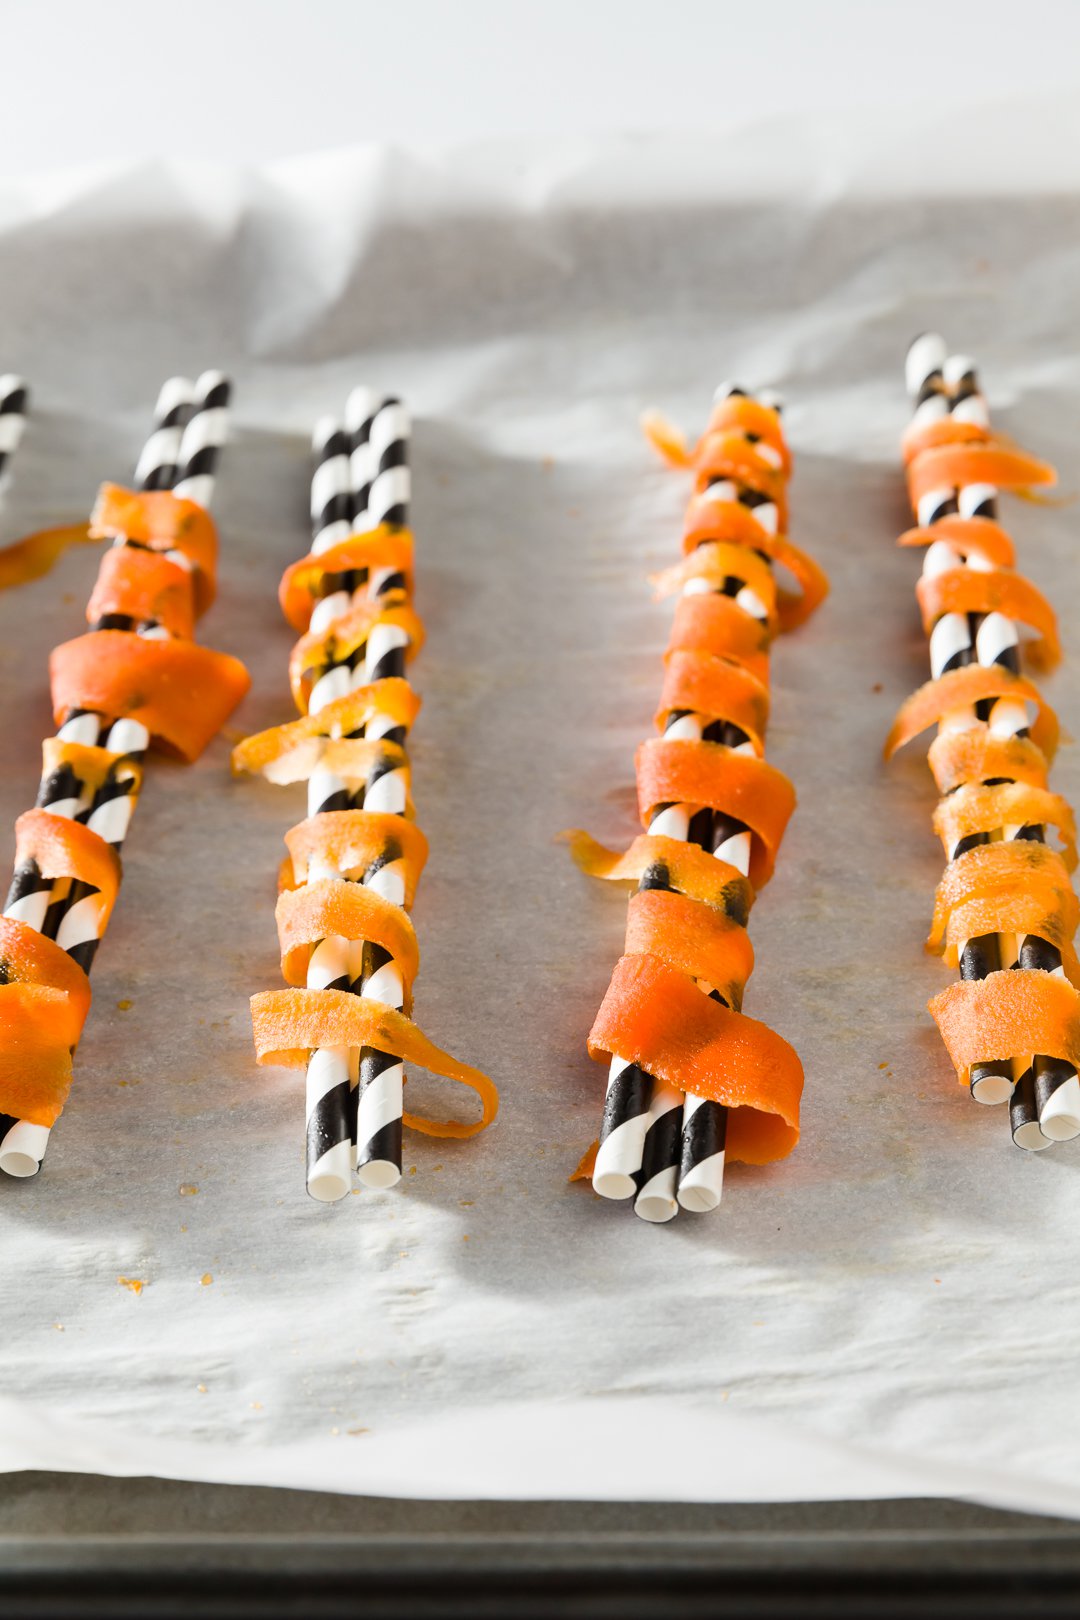 Carrot ribbons wrapped around paper straws to create candied carrot curls.